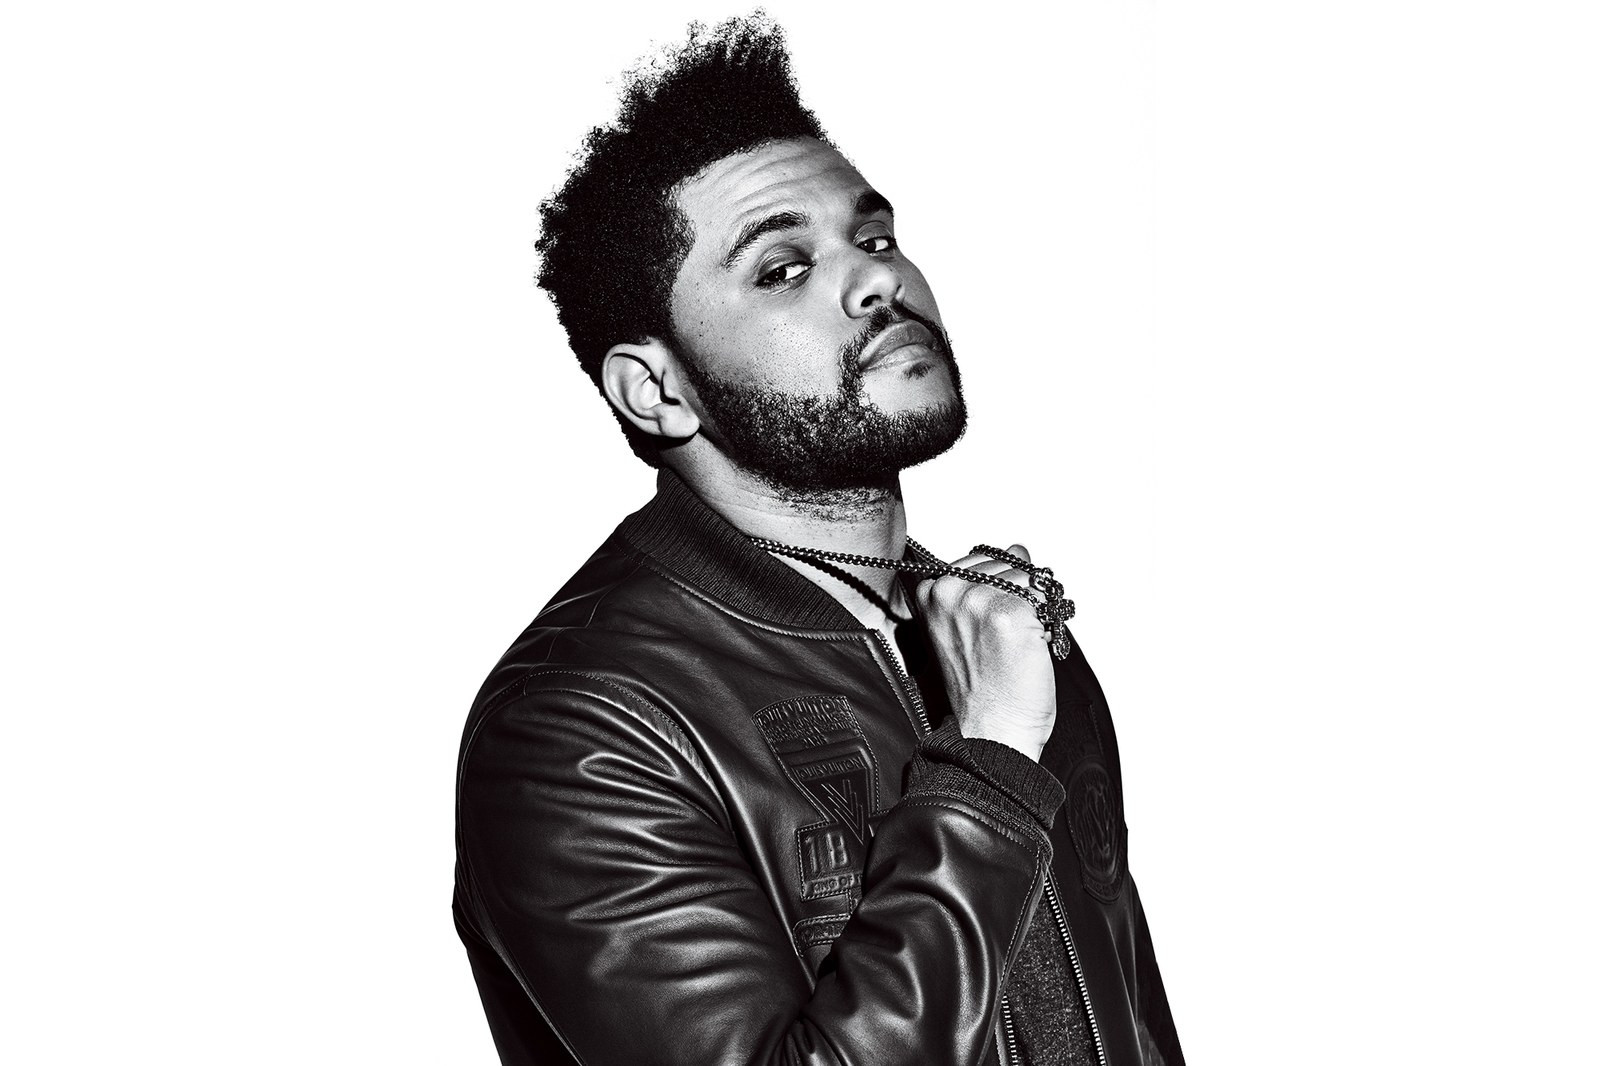 The Weeknd (The Weeknd)